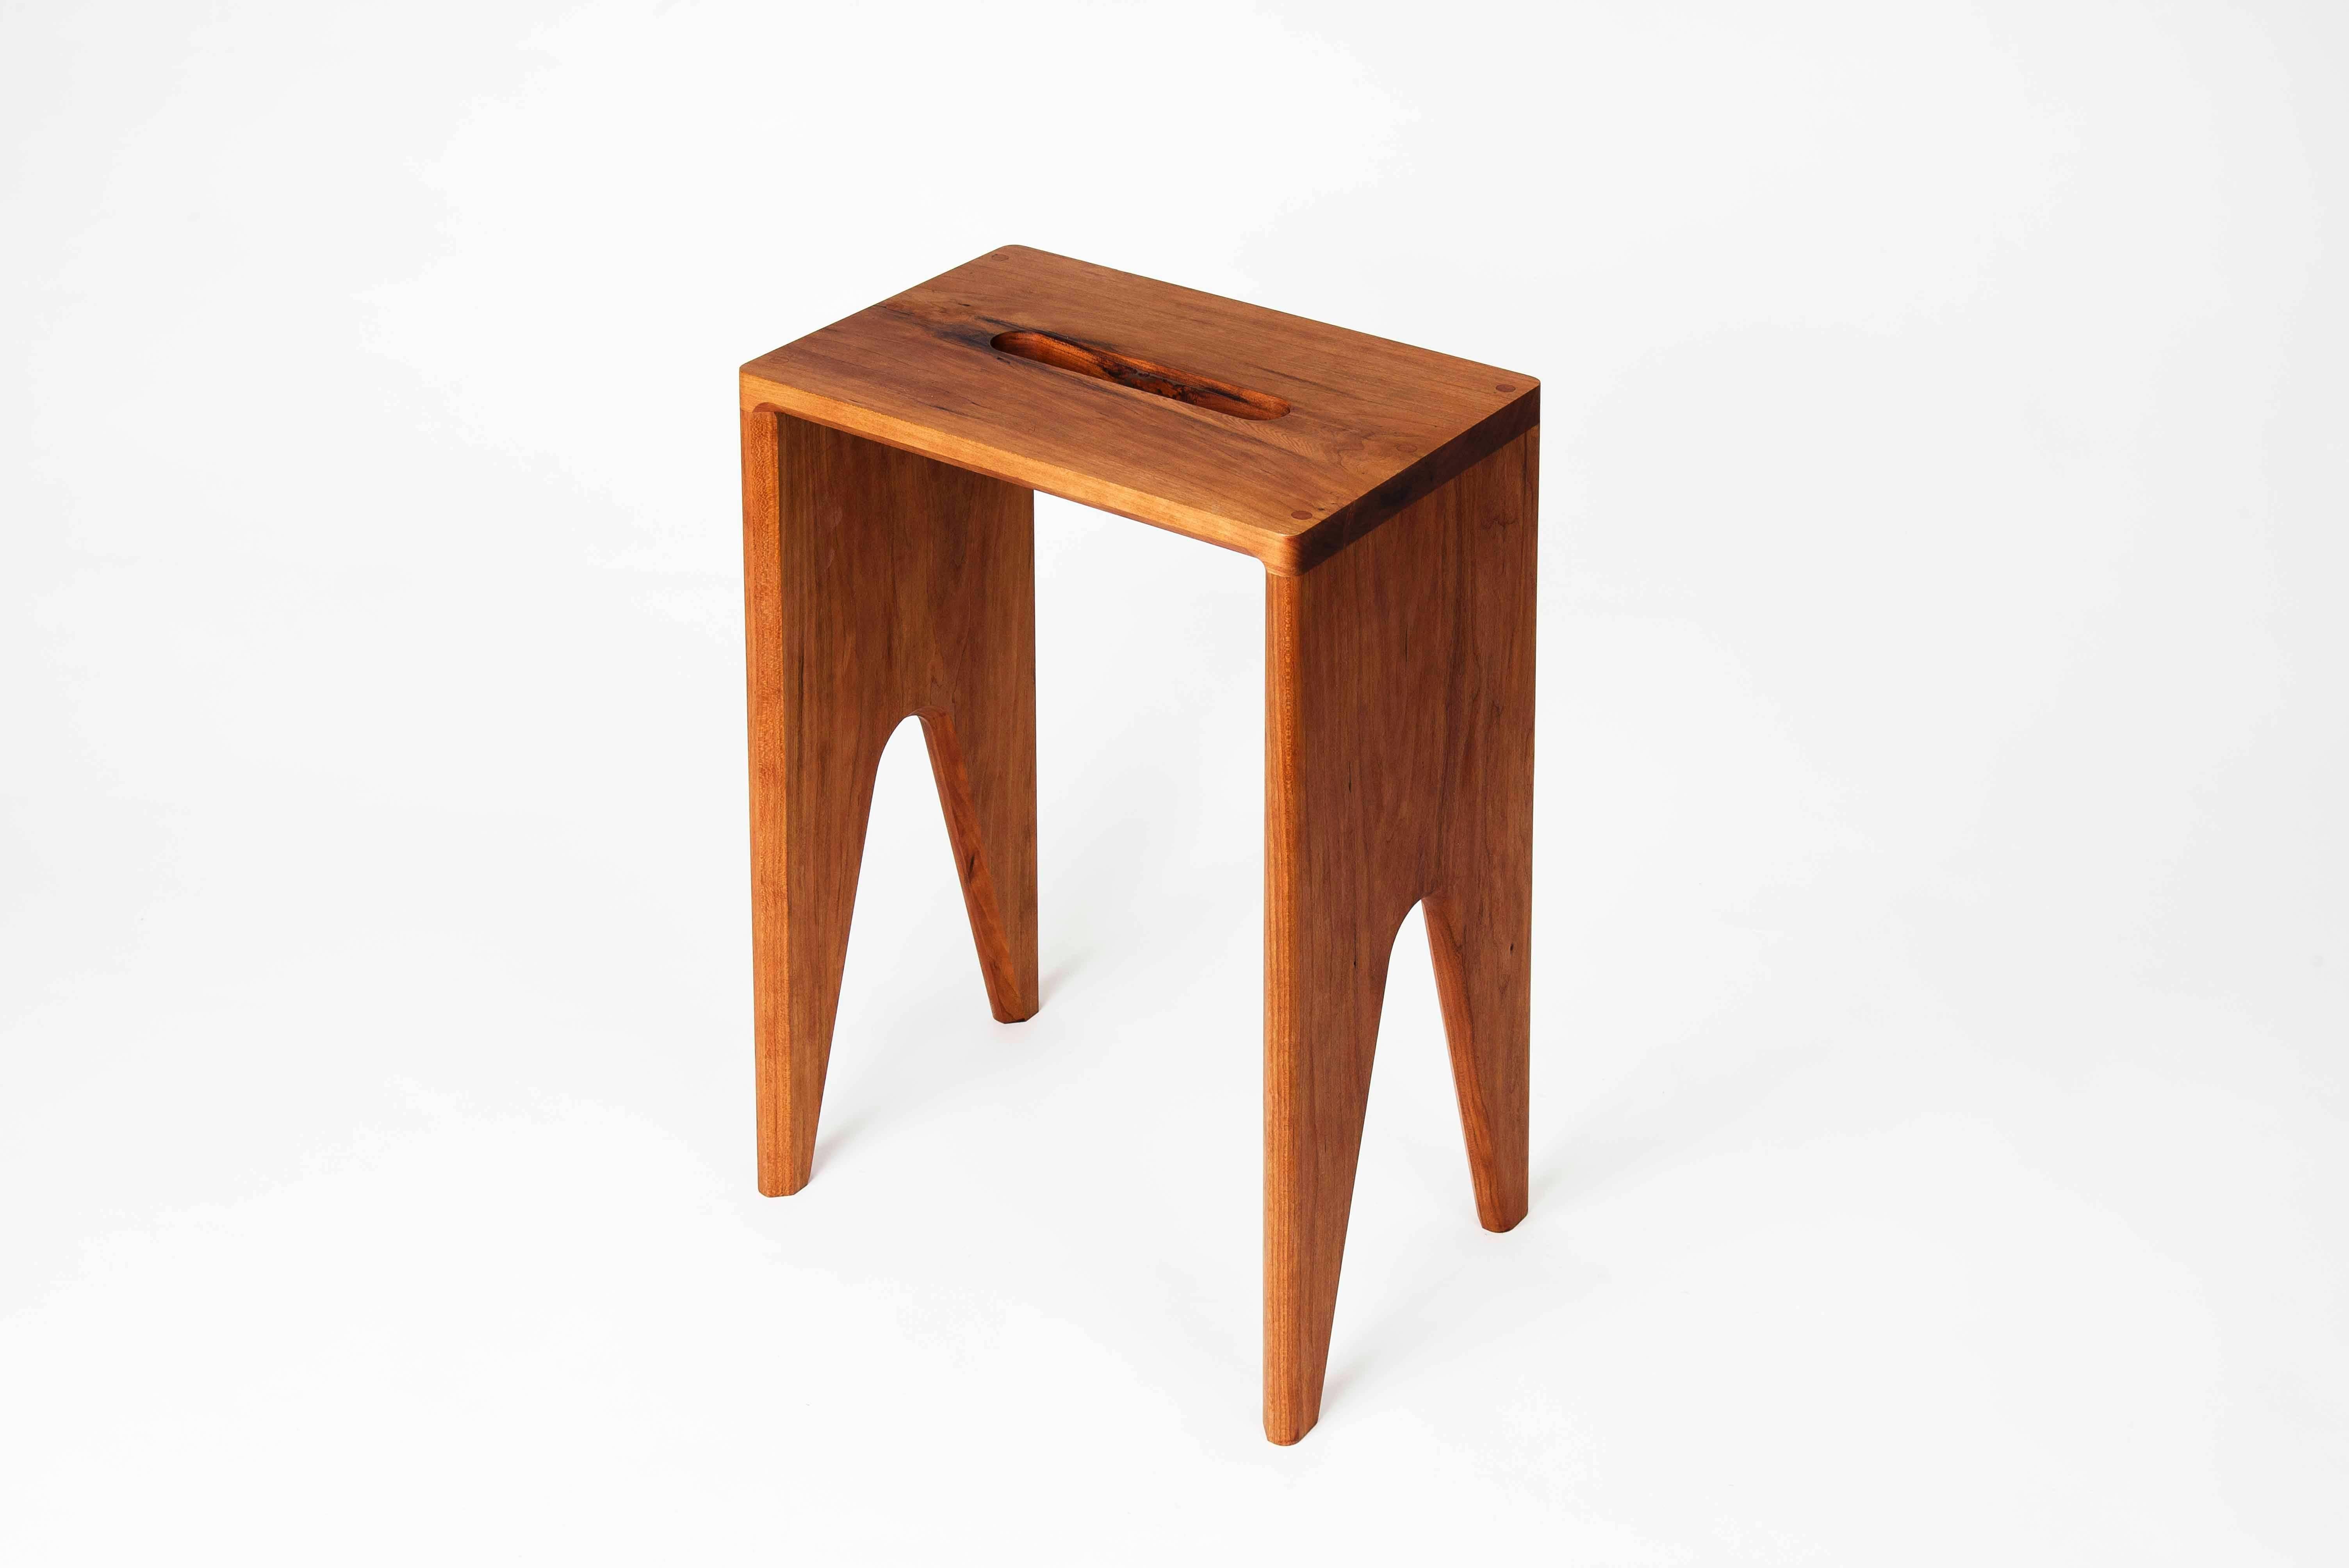 American Contemporary Prop Stool Handmade Solid Cherry Wood Seat from CBR Studio For Sale